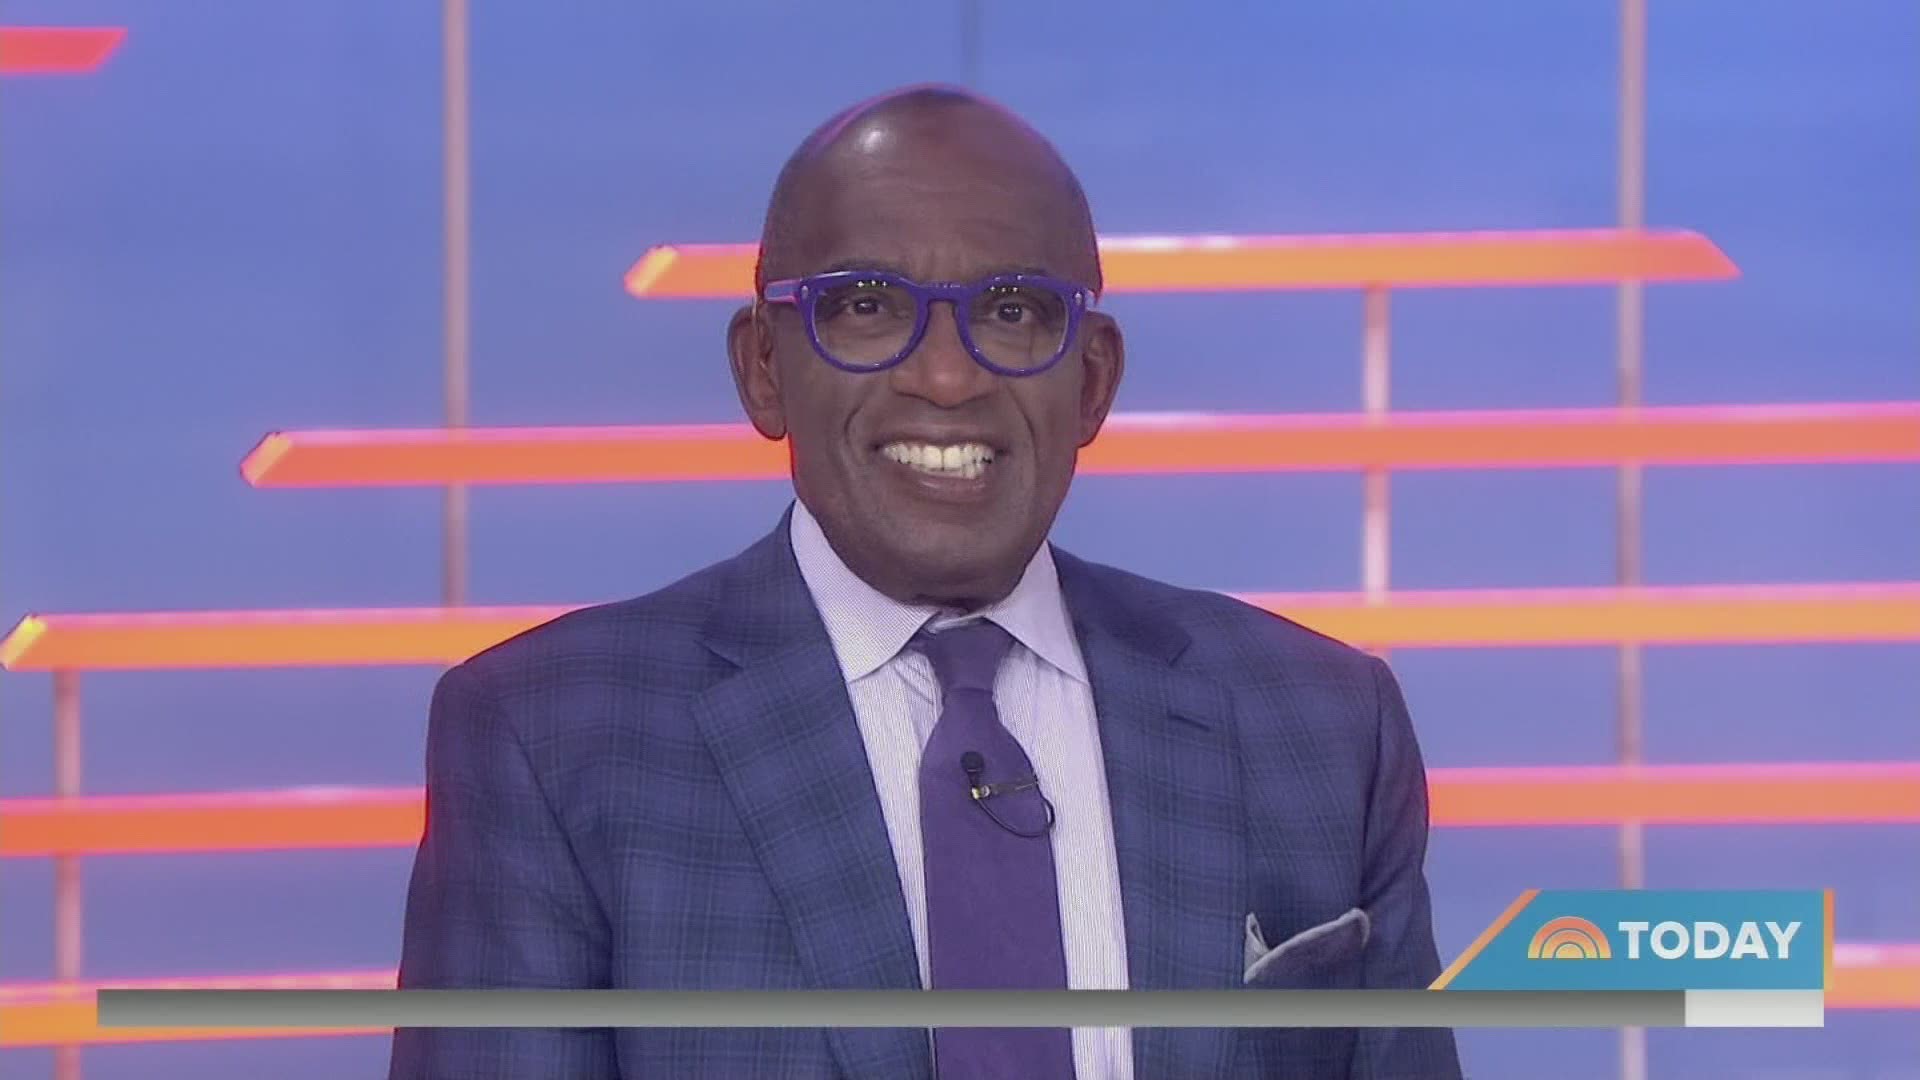 Al Roker discusses some of what Cleveland has to offer and praises the city as he prepares to visit for NBC's 'Today' and their 'Reopening America' series.